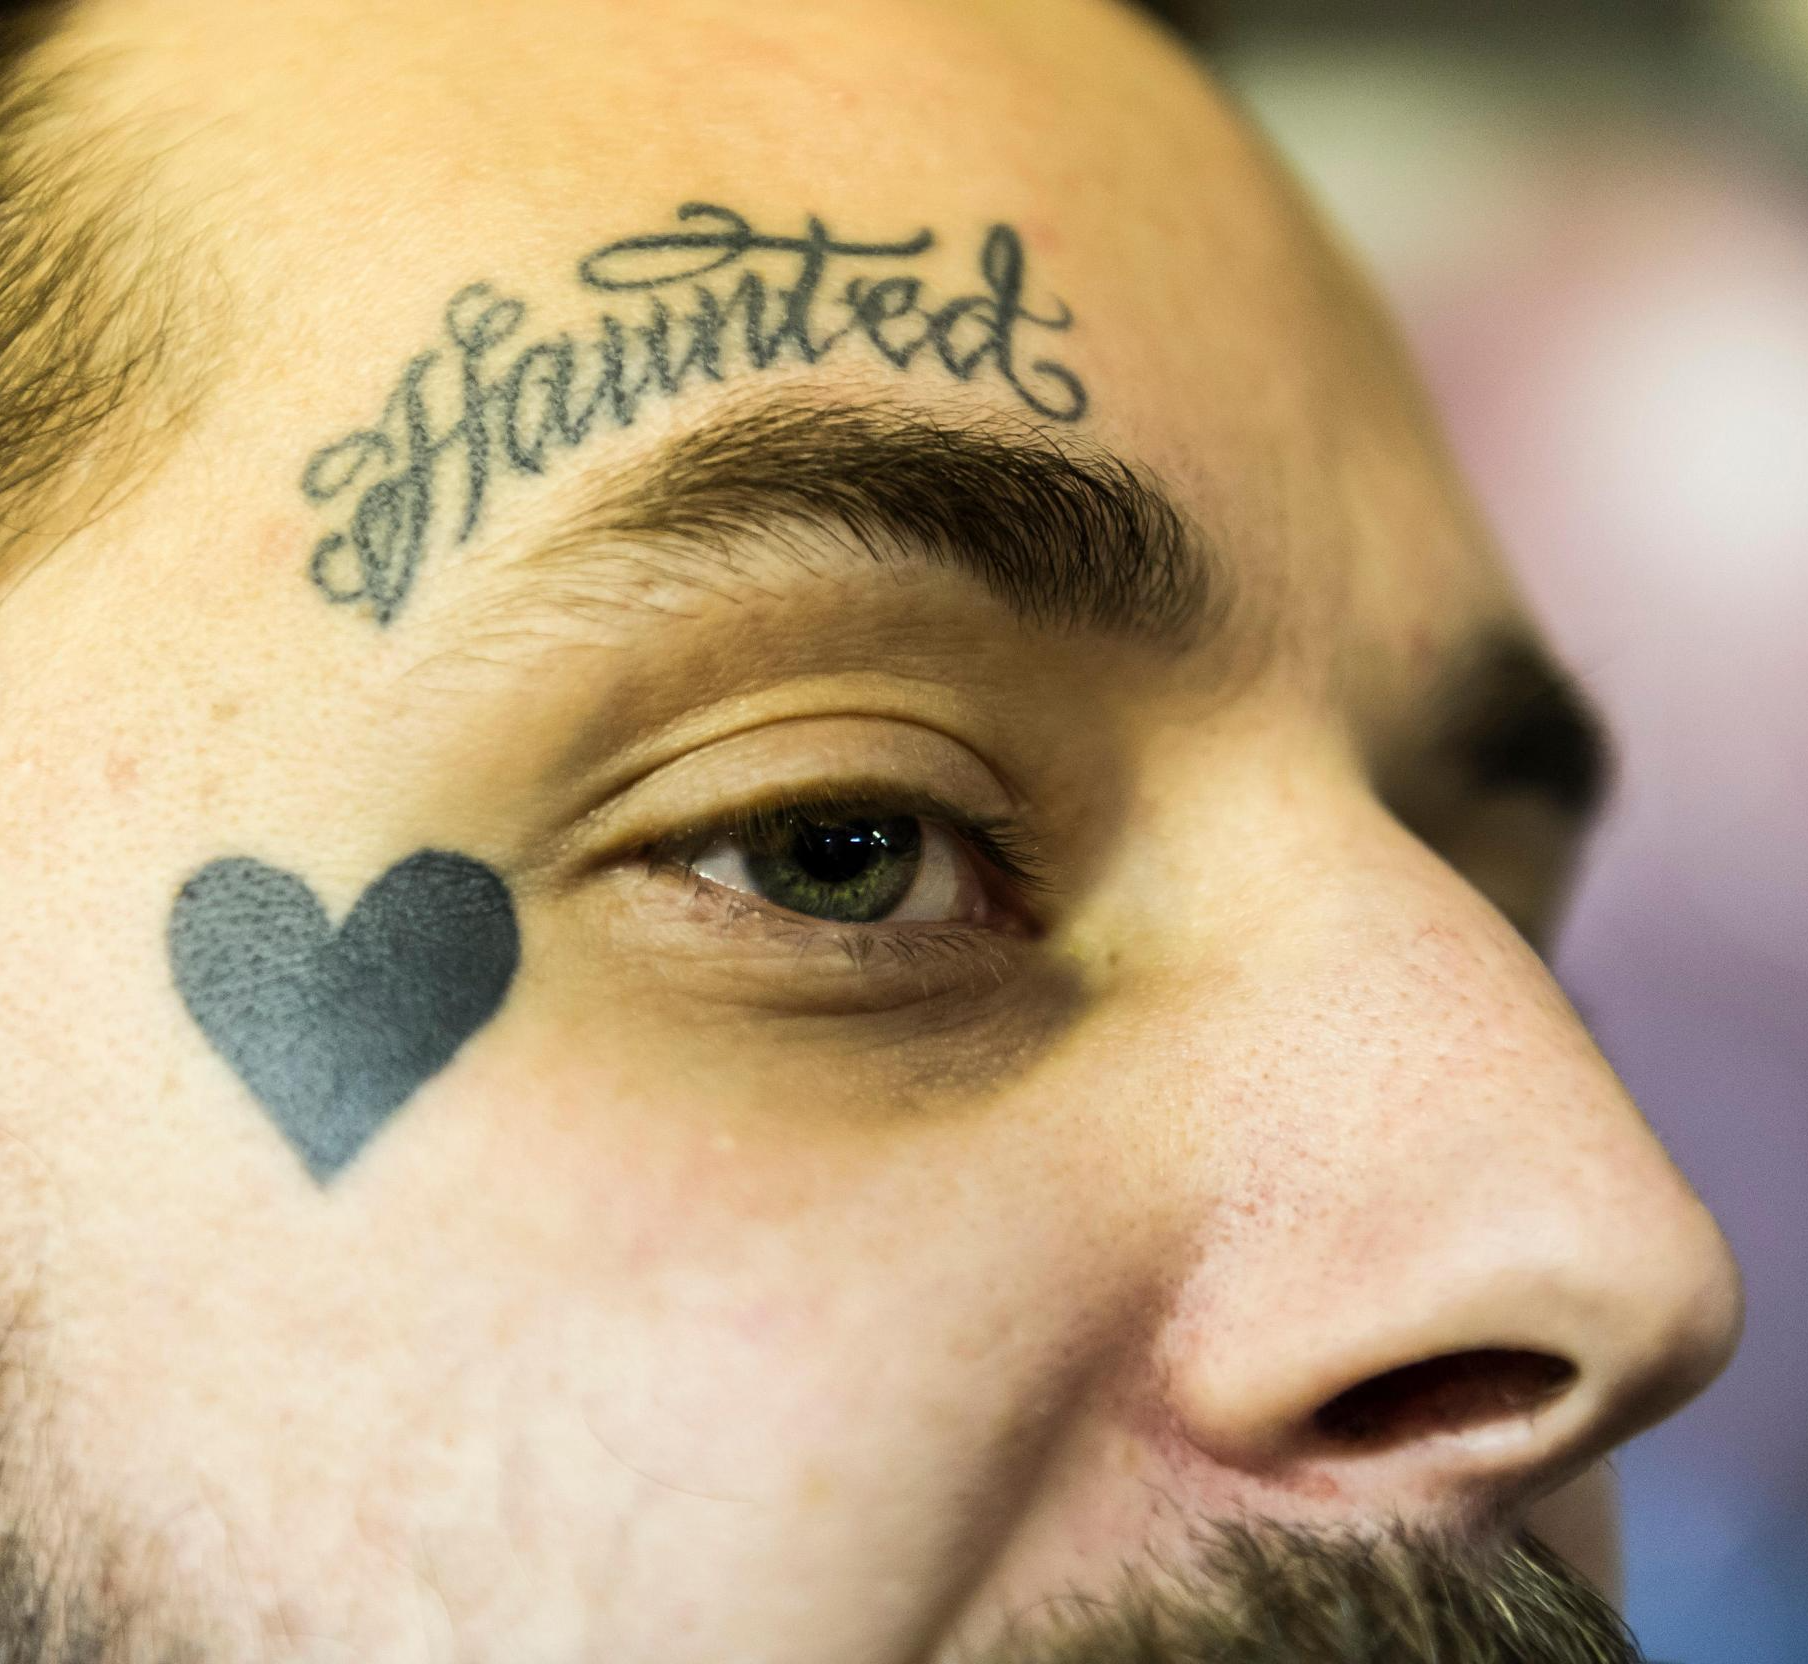 Lady tattoos boyfriend's name on her face to prove her love for him